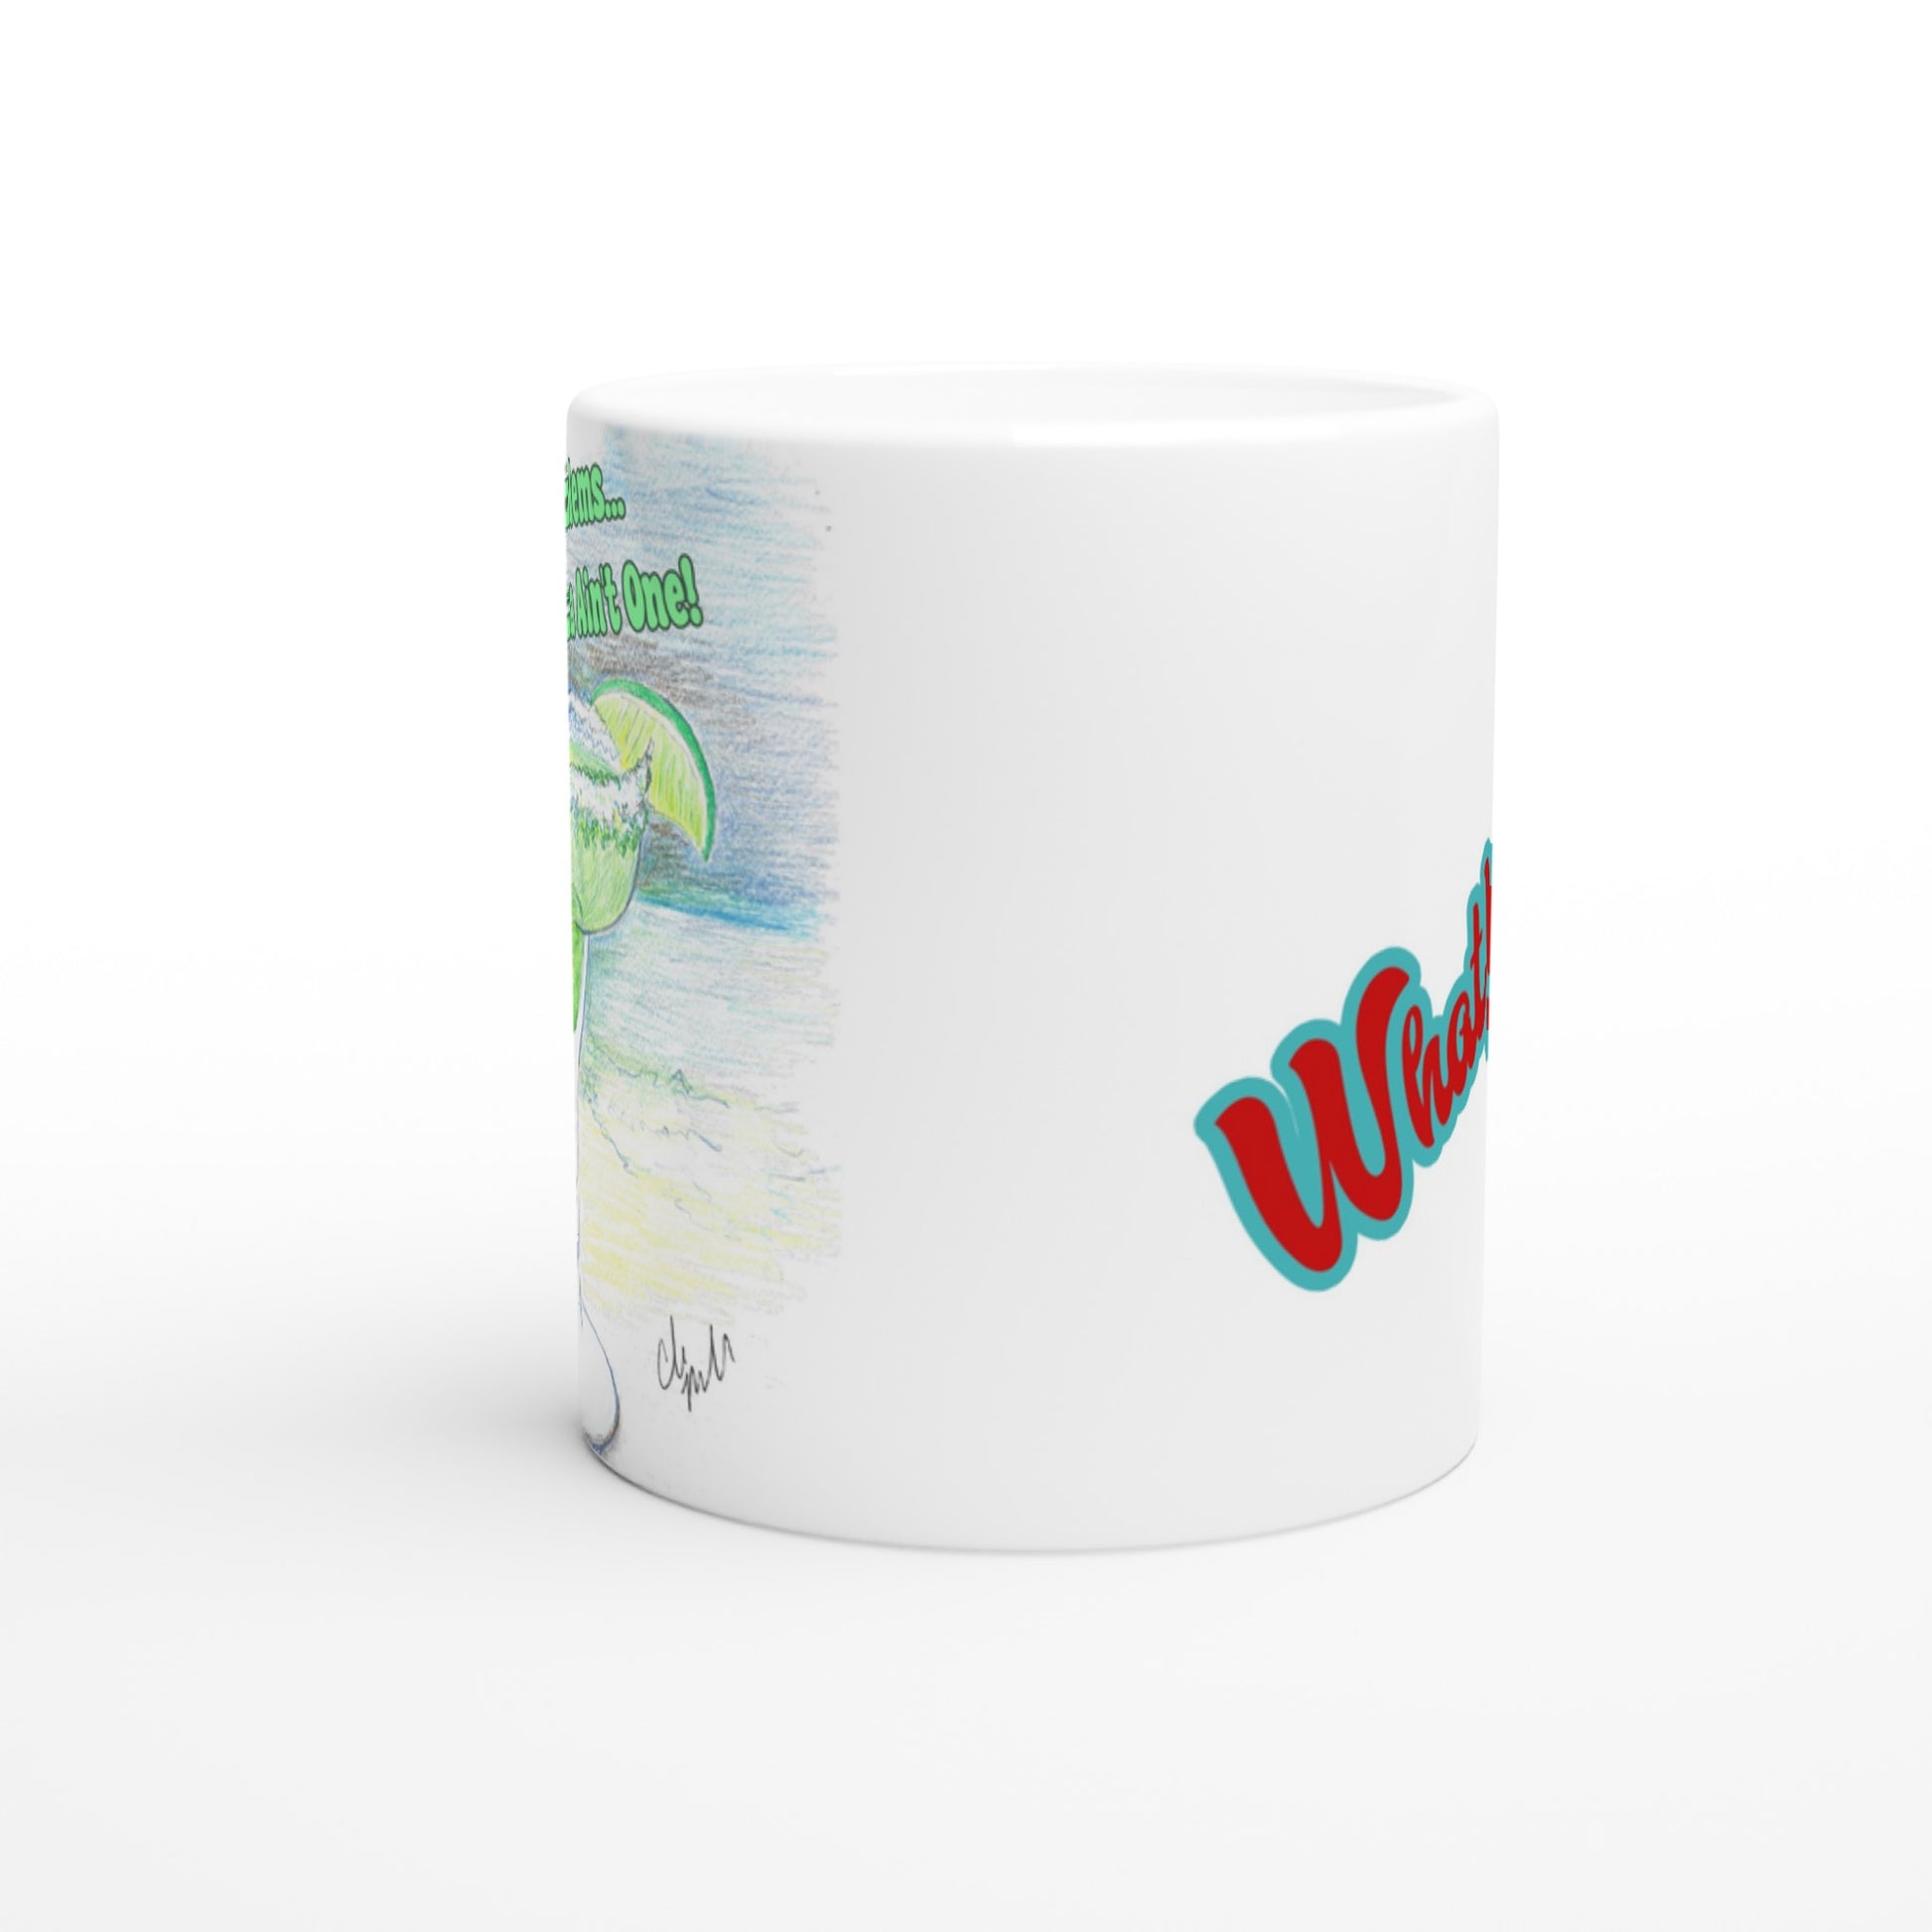 White ceramic 11oz mug with motto I Got 99 Problems But a Margarita Aint One on front and WhatYa Say logo on back coffee mug dishwasher and microwave safe from WhatYa Say Apparel side view.